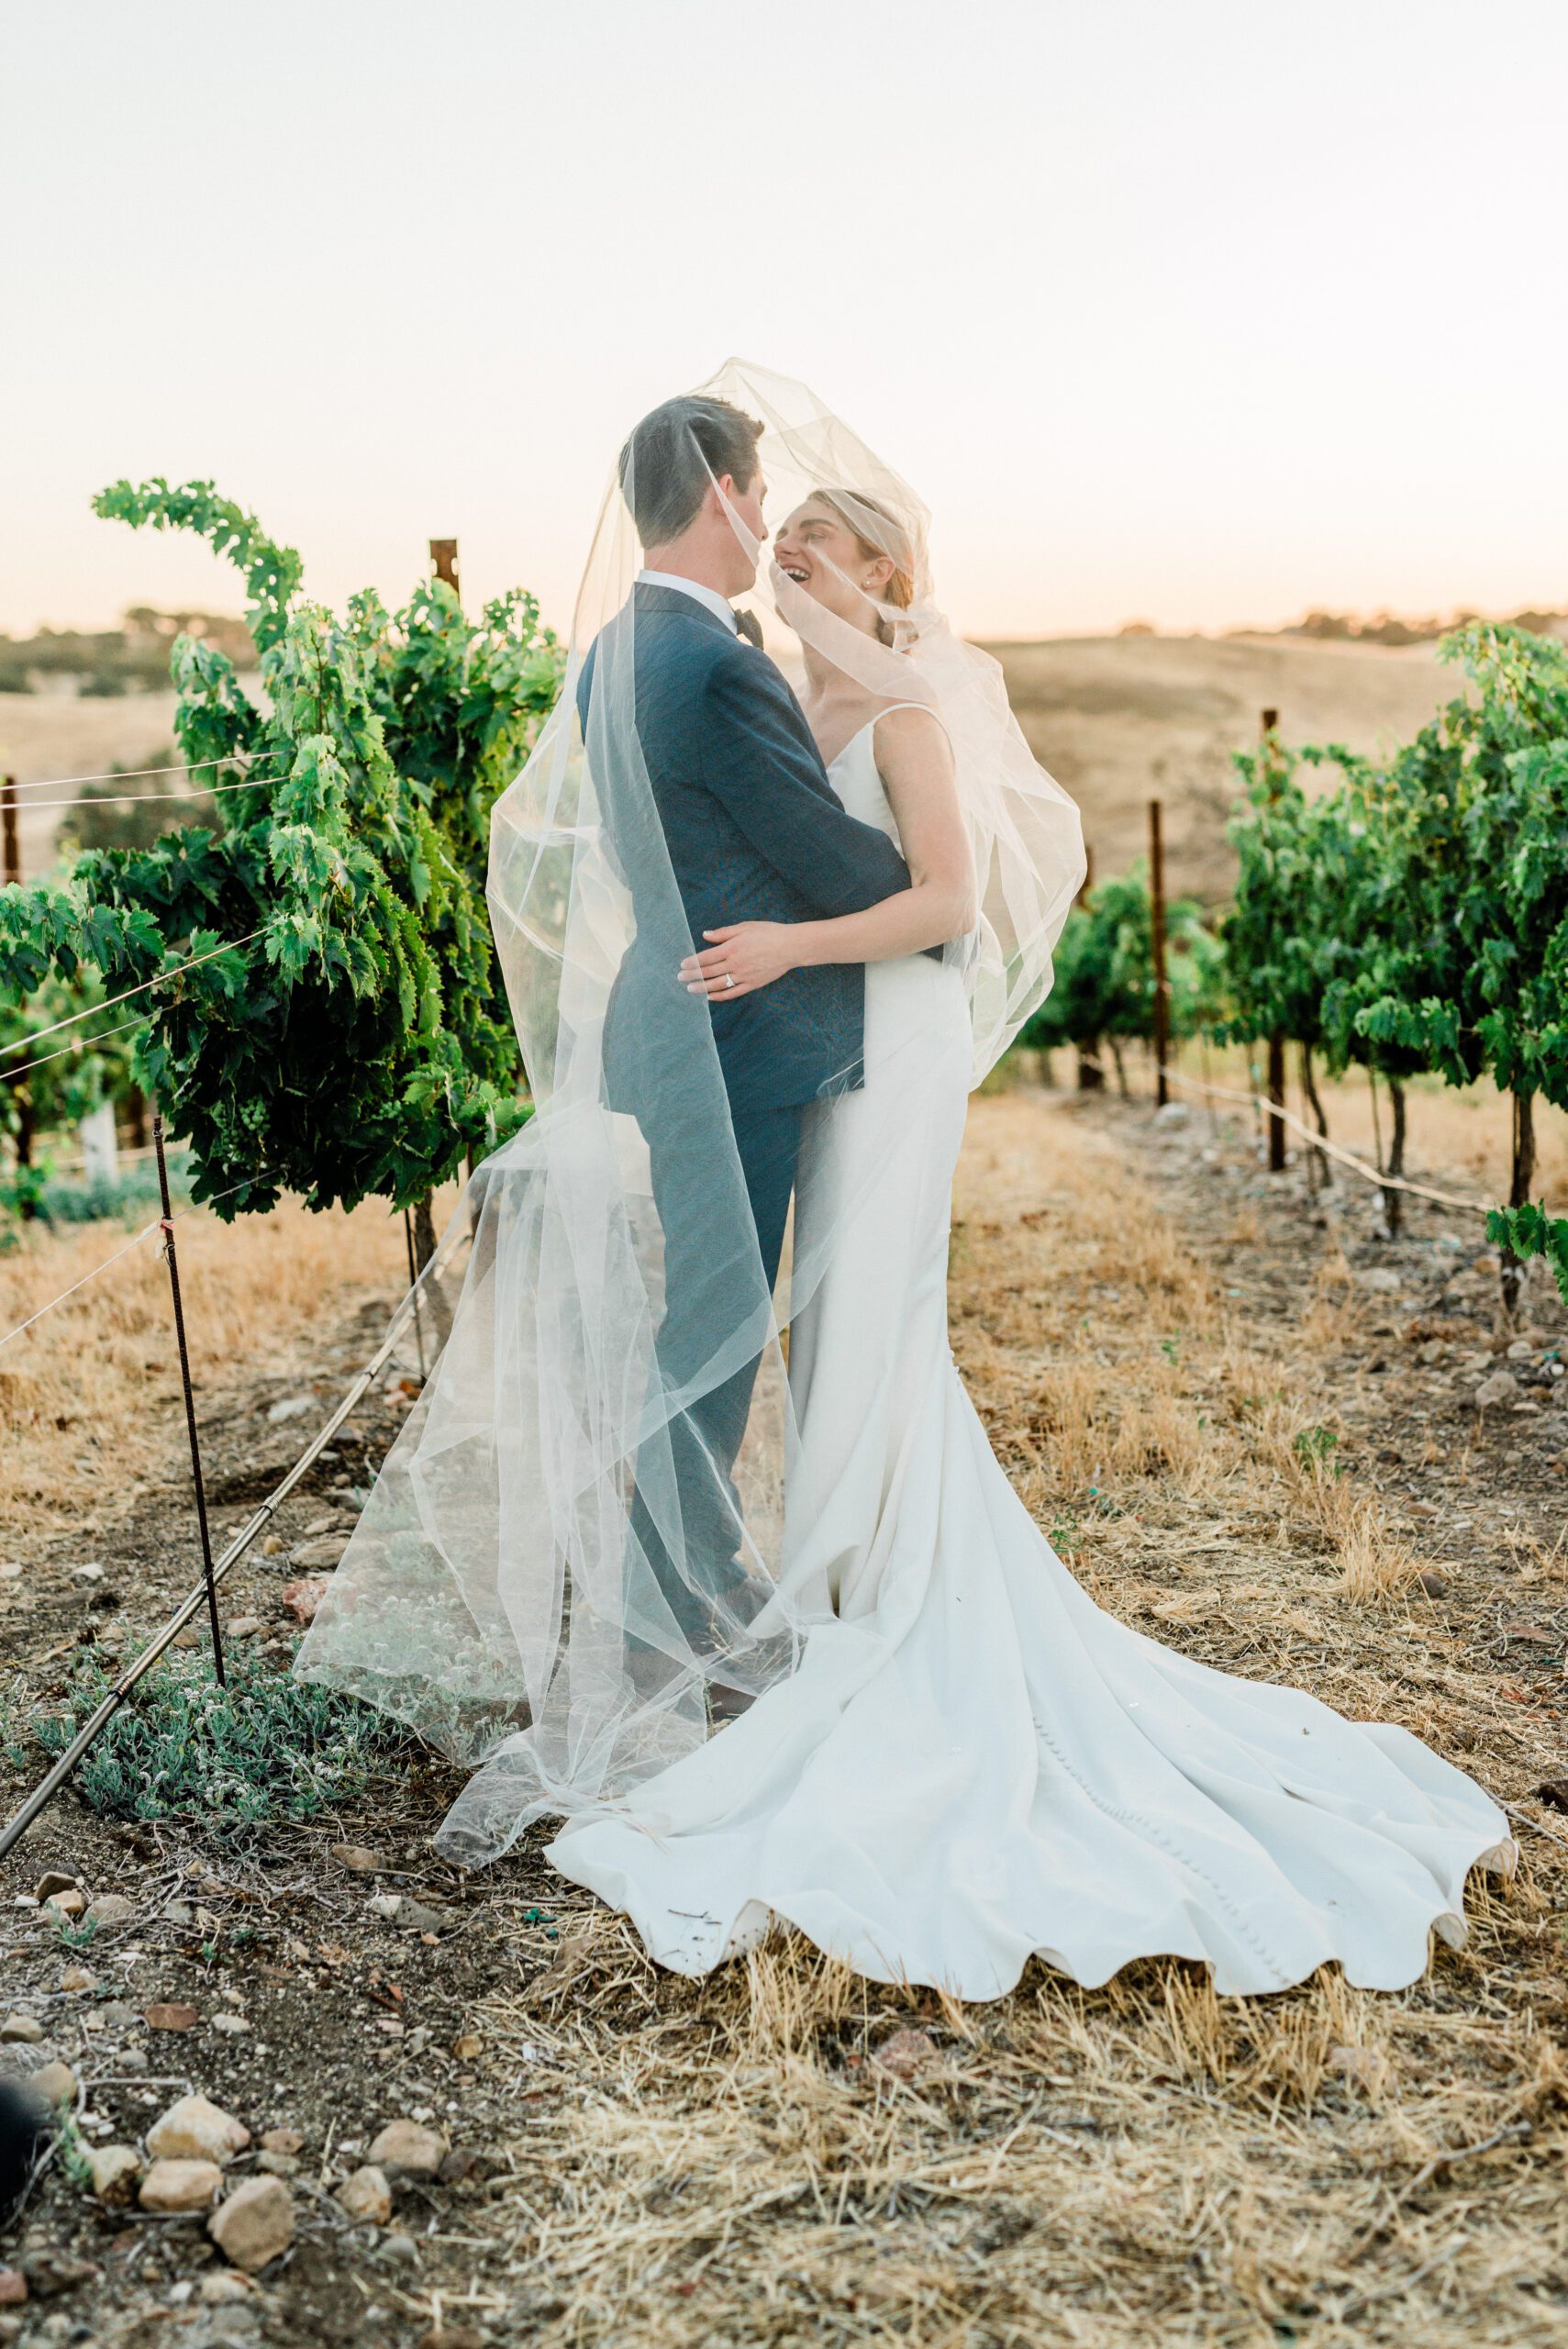 Bride and Groom laugh during a romantic moment on their wedding day at Ellas Vineyard in Creston California.